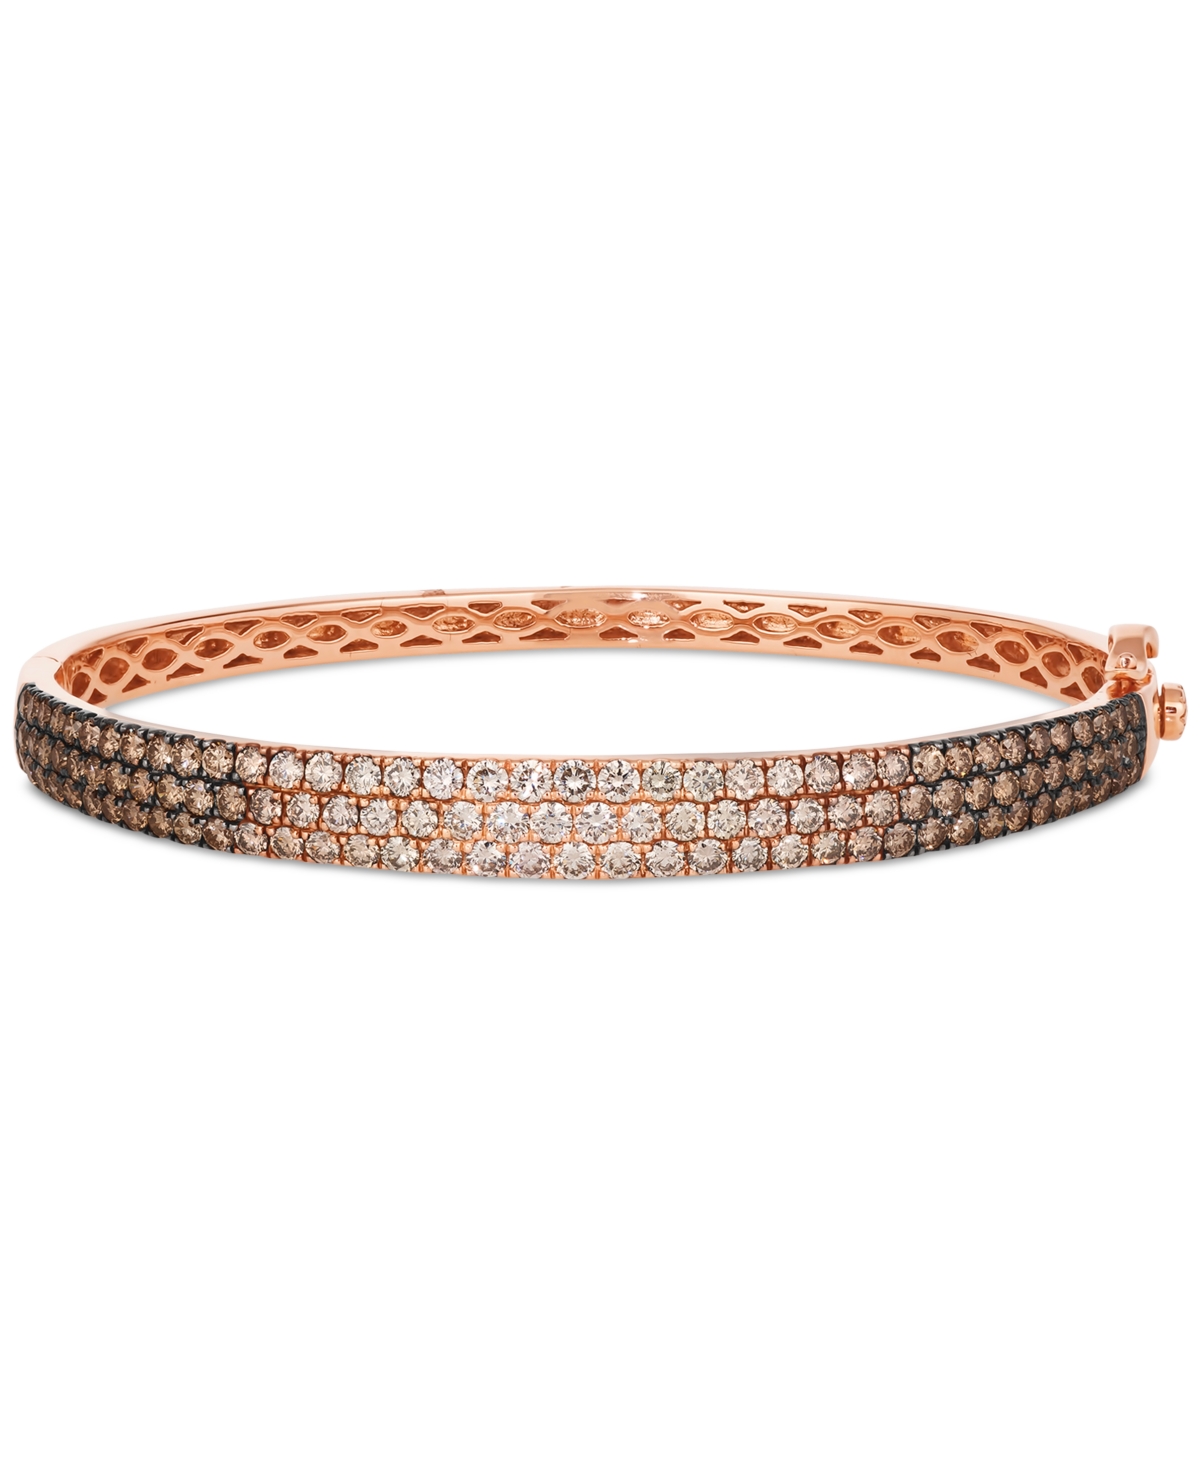 Le Vian Ombre Chocolate Ombre Diamond & Nude Diamond Pave Bangle Bracelet (3-1/2 Ct. T.w.) In 14k Rose Gold In K Strawberry Gold Bangle